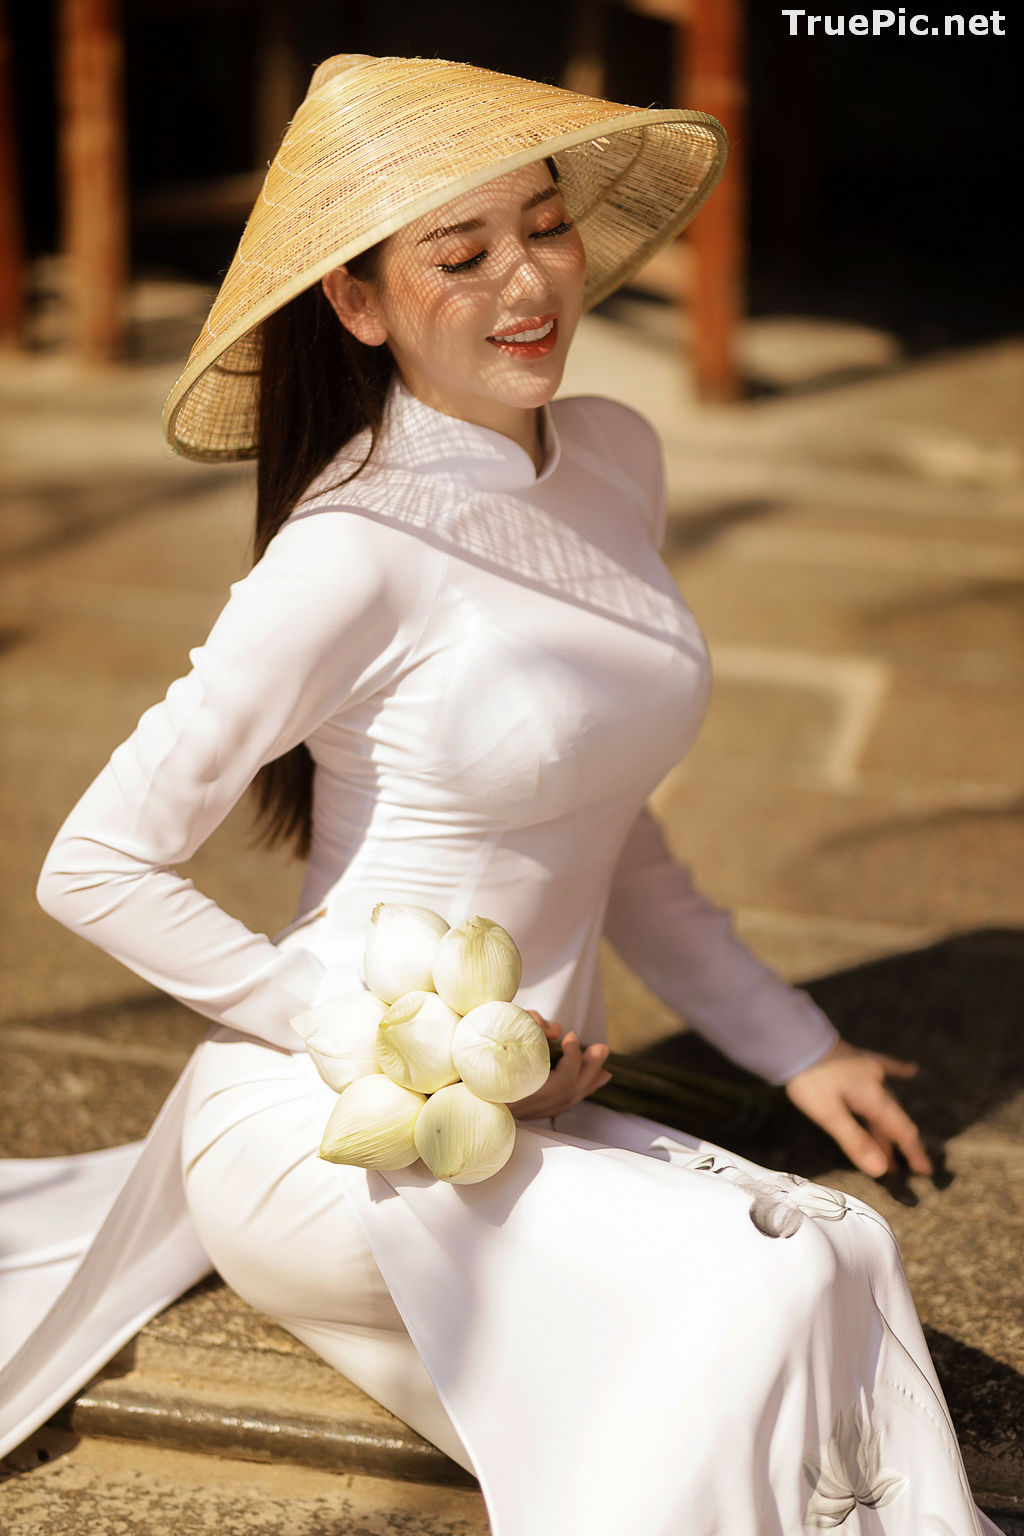 Image The Beauty of Vietnamese Girls with Traditional Dress (Ao Dai) #2 - TruePic.net - Picture-68